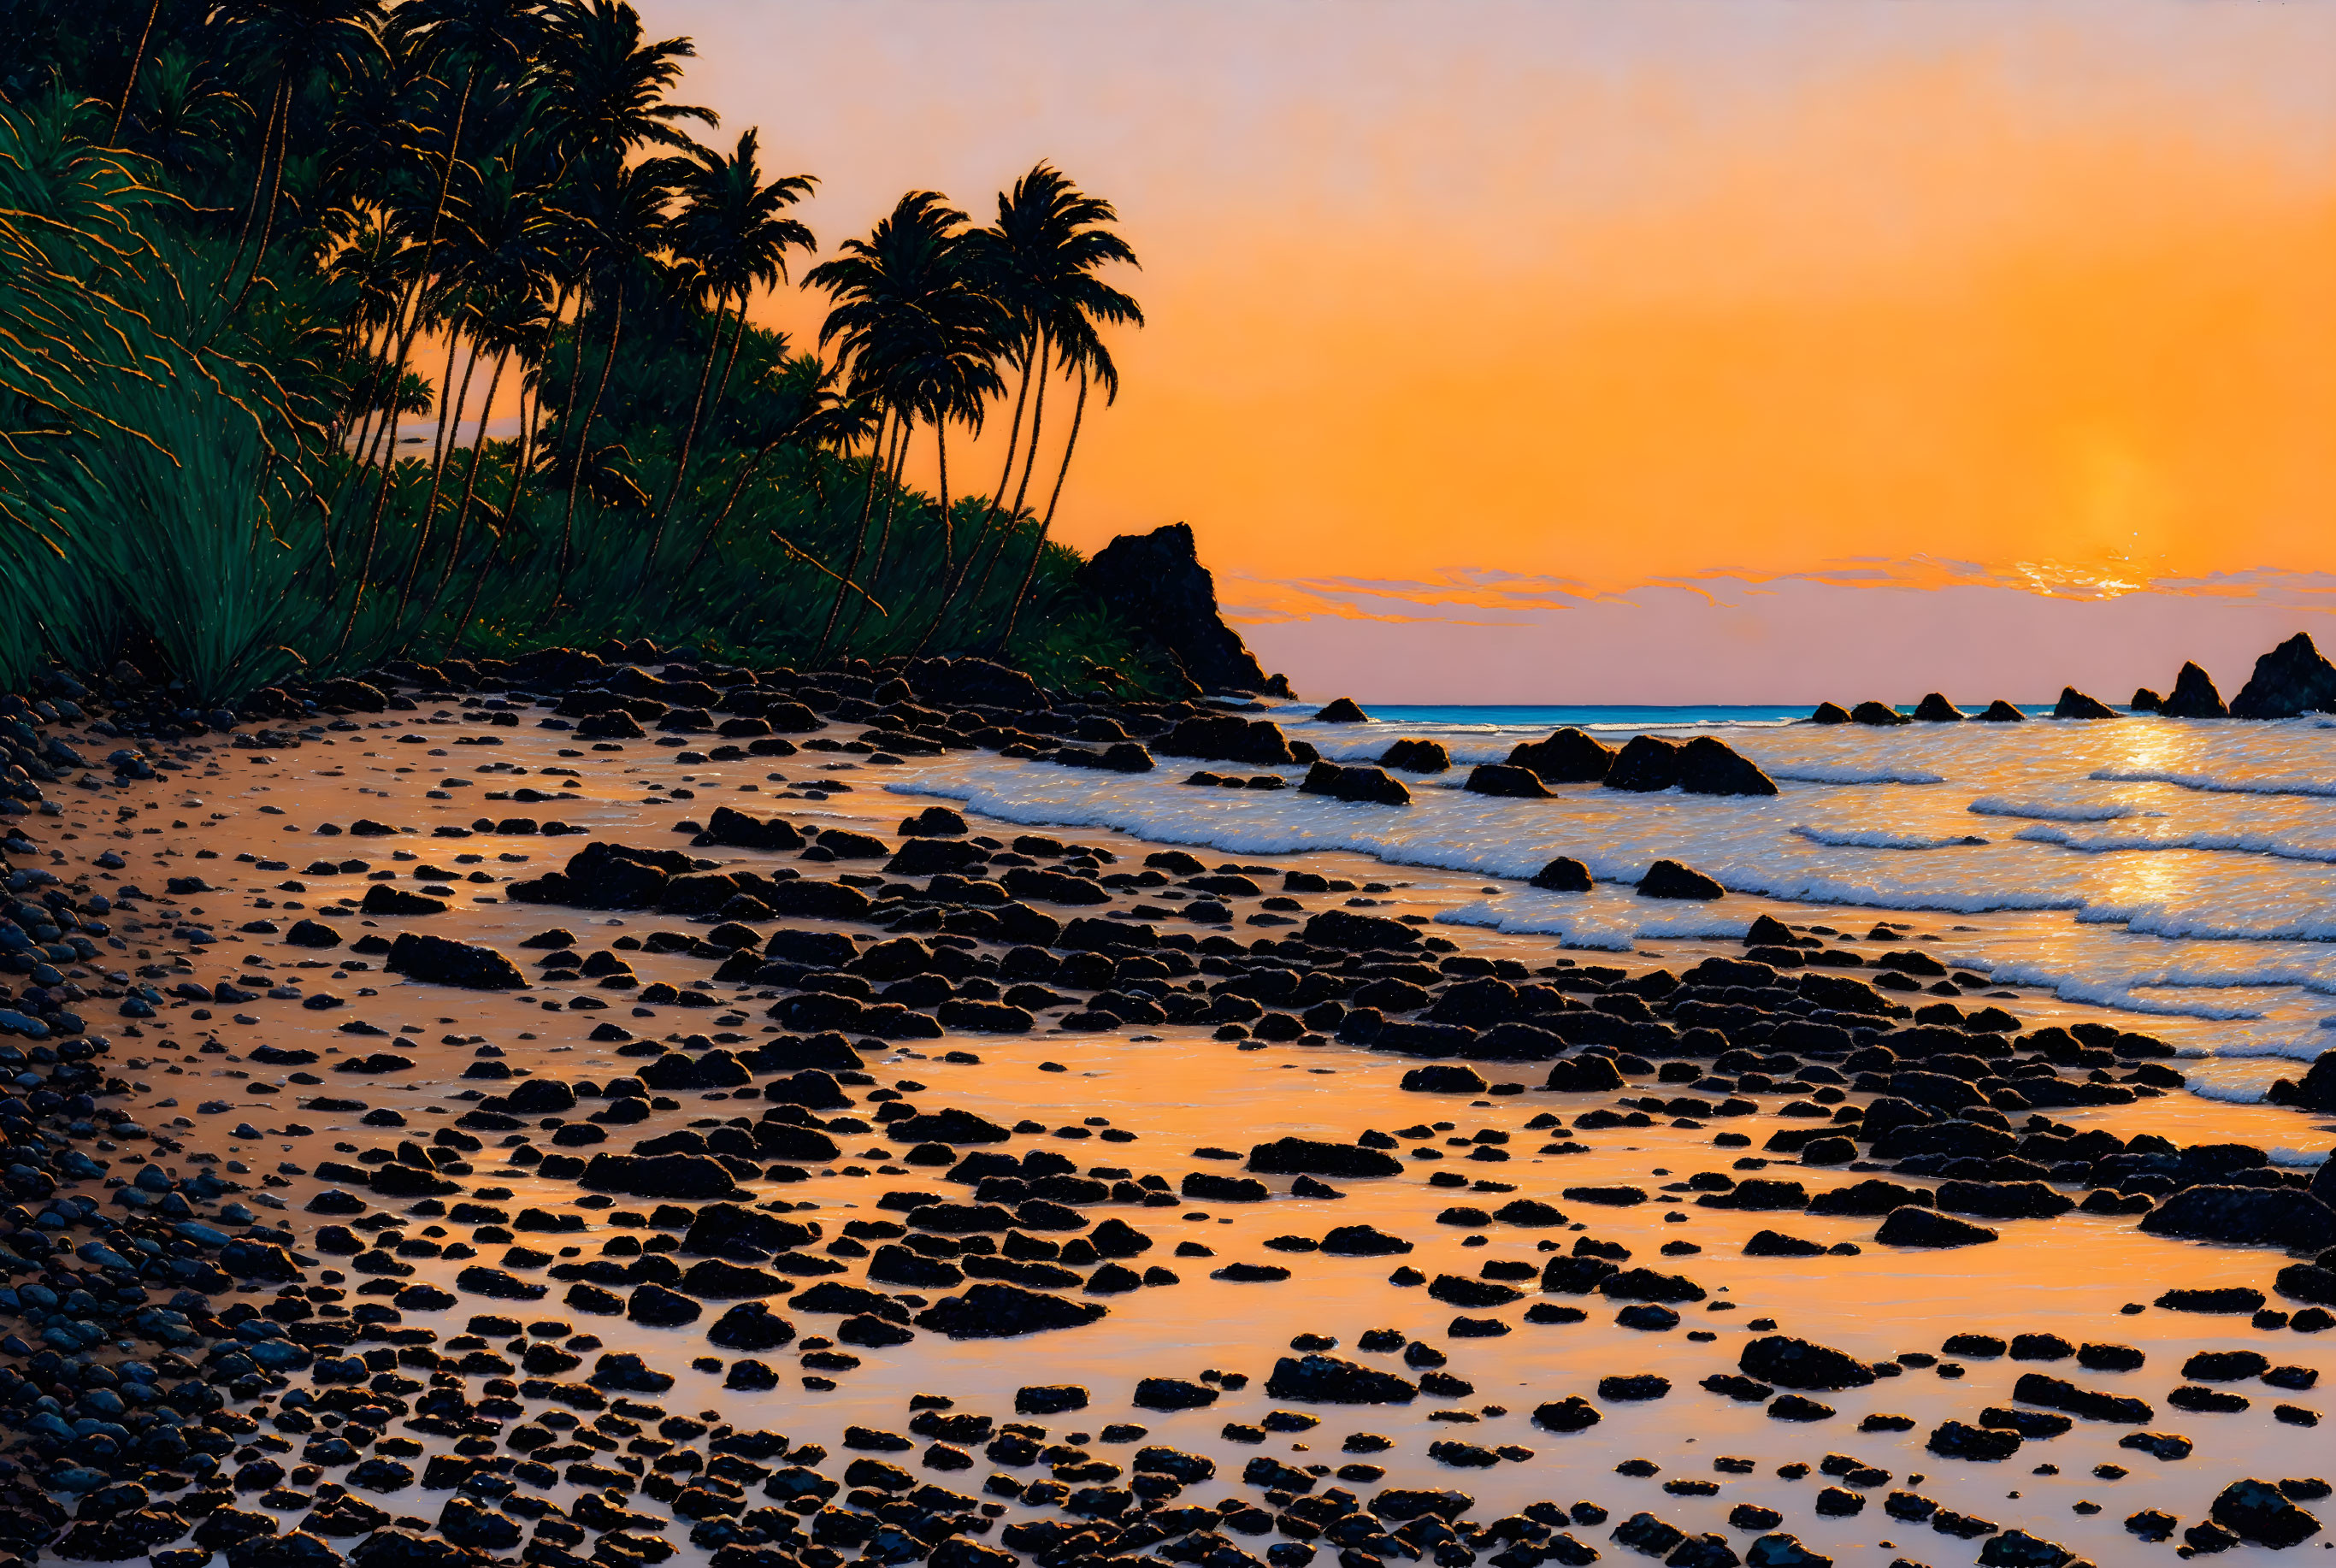 Tropical Beach Sunset with Palm Trees and Orange Skies